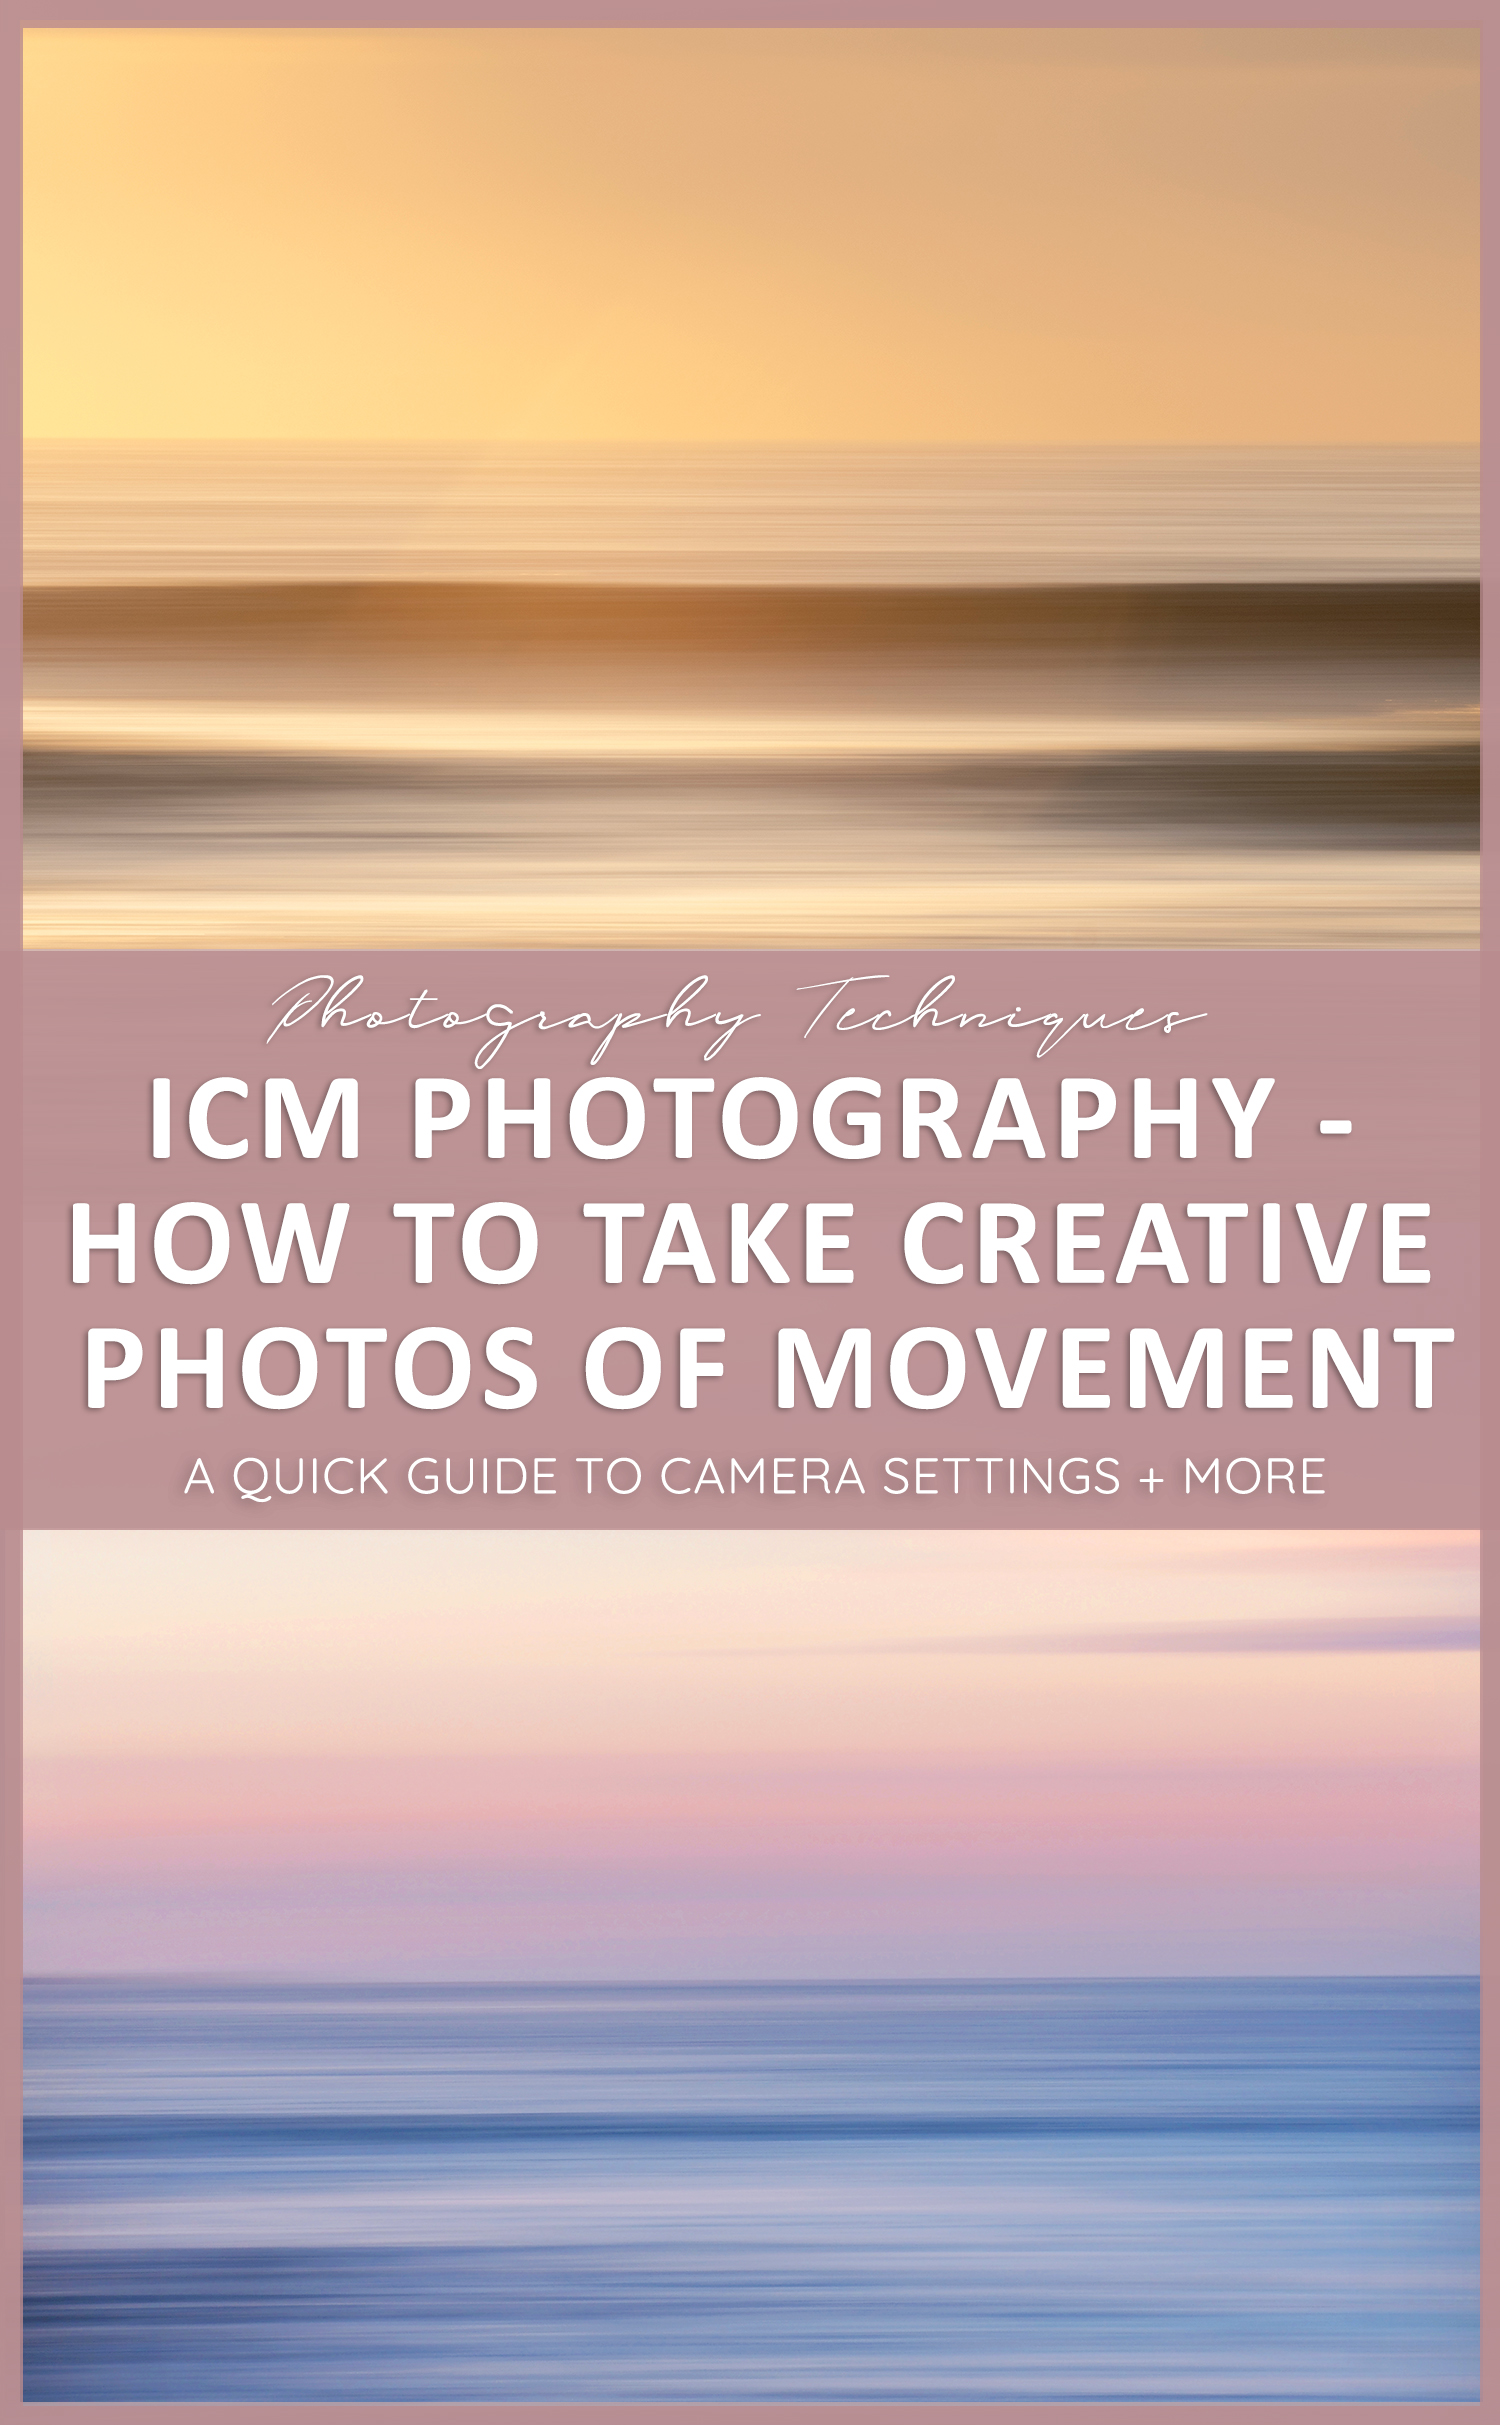 A Guide to ICM Photography